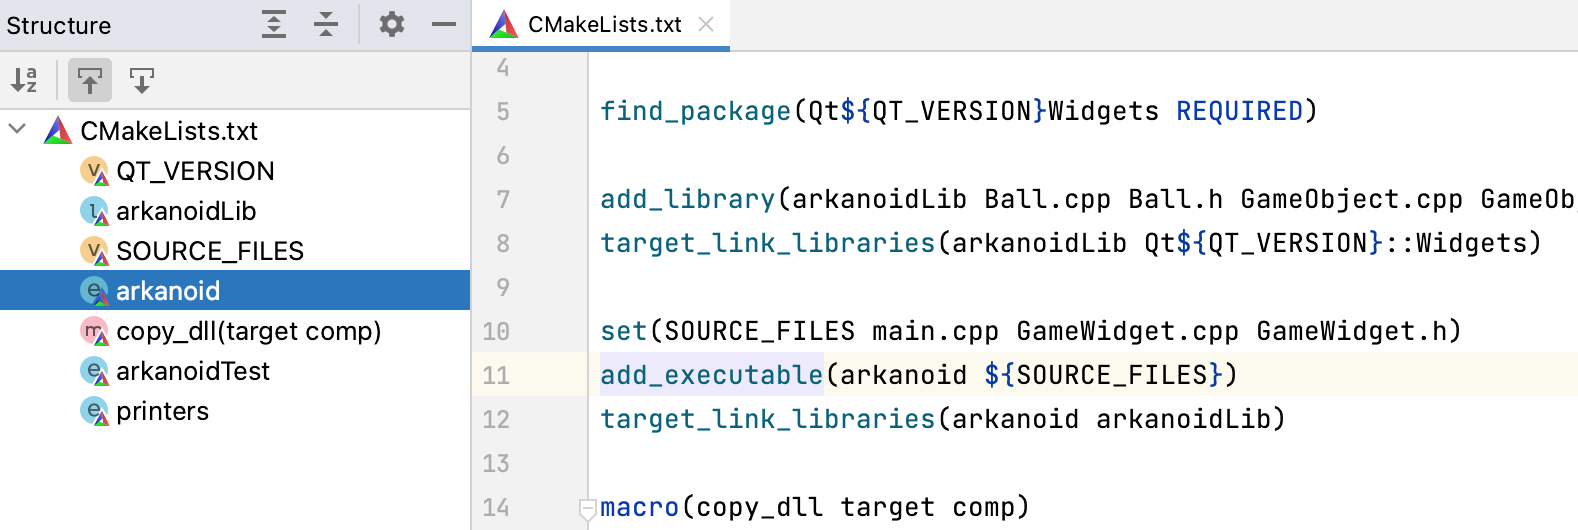 Structure view for CMake